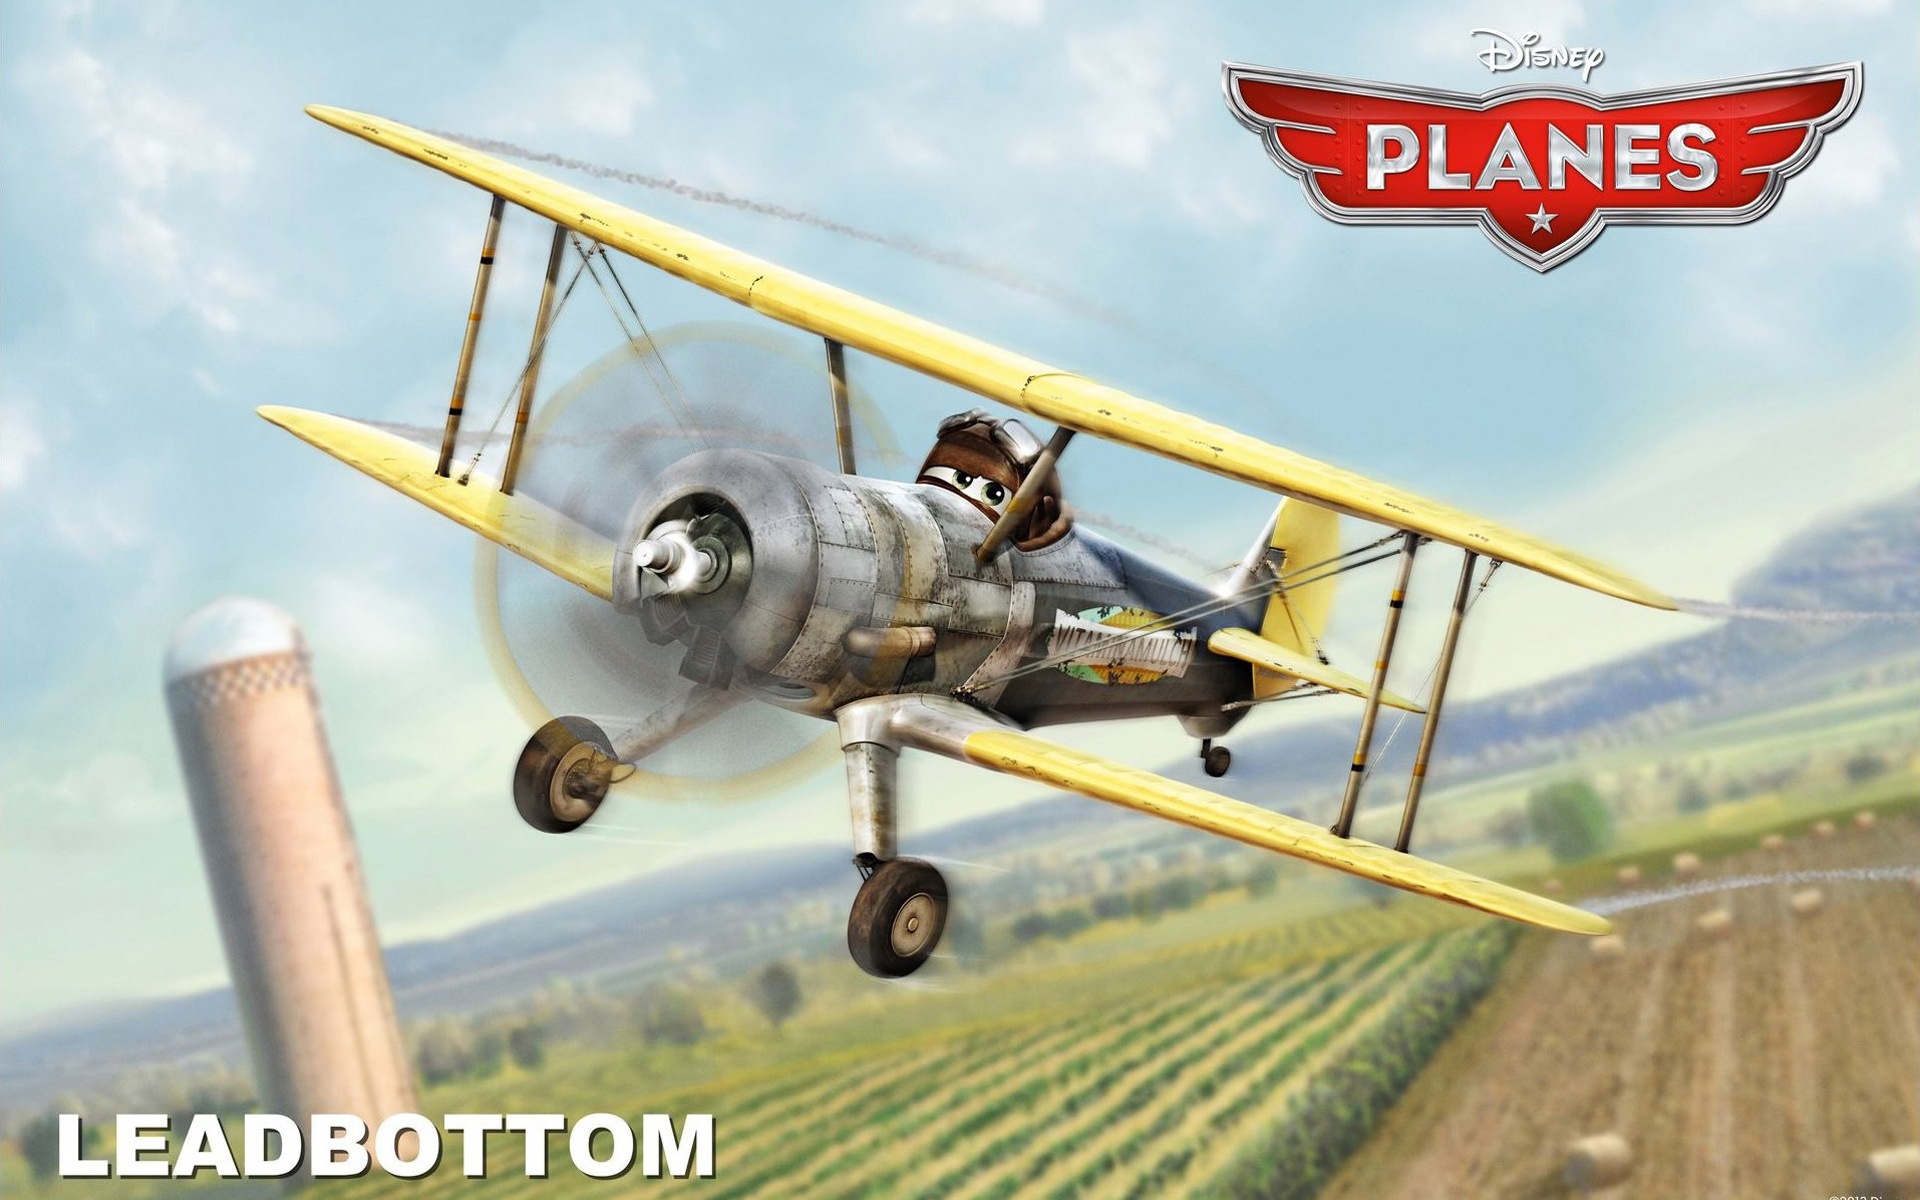 Planes 2013 HD wallpapers #8 - 1920x1200